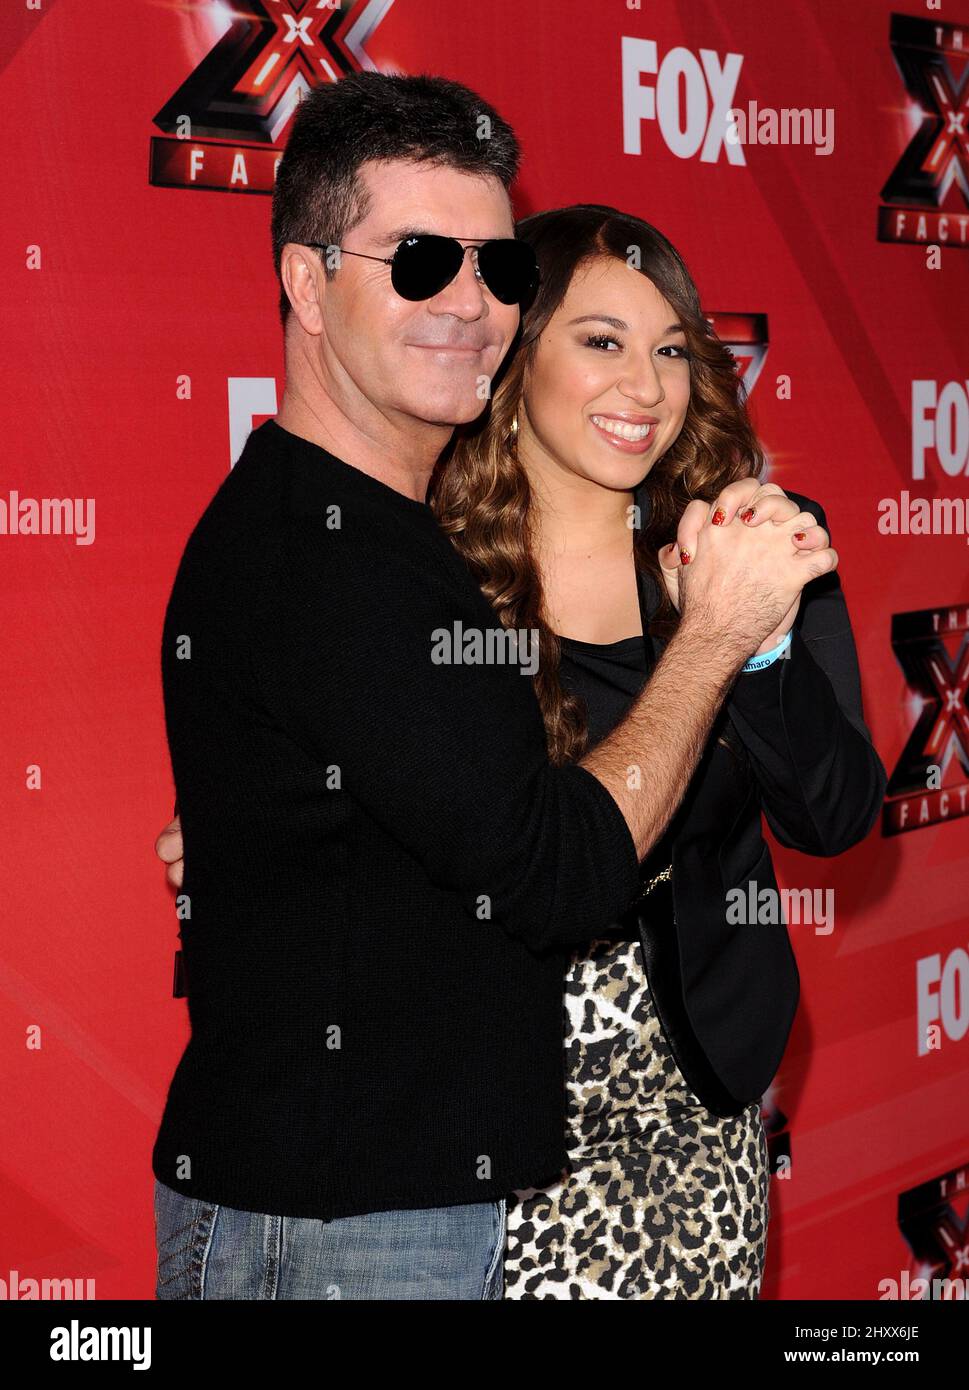 Simon Cowell and Melanie Amaro during 'The X Factor' Press Conference at CBS Television Center in Los Angeles, California Stock Photo